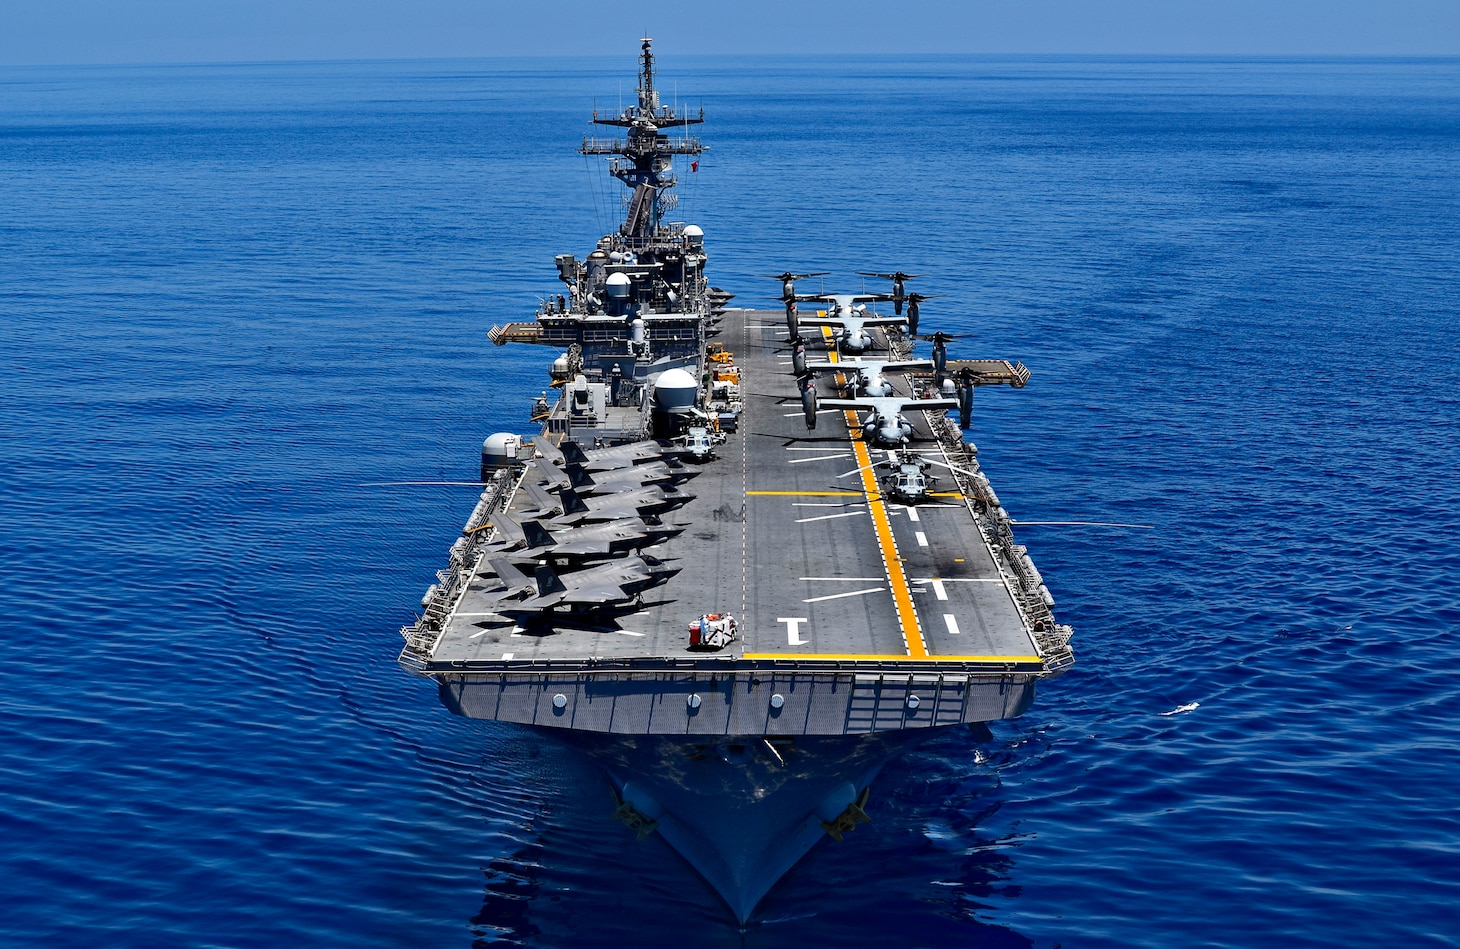 SOUTH CHINA SEA (March 29, 2019) The amphibious assault ship USS Wasp (LHD 1) transits the waters of the South China Sea. Wasp, flagship of Wasp Amphibious Ready Group, is operating in the Indo-Pacific region to enhance interoperability with partners and serve as a lethal, ready-response force for any type of contingency.